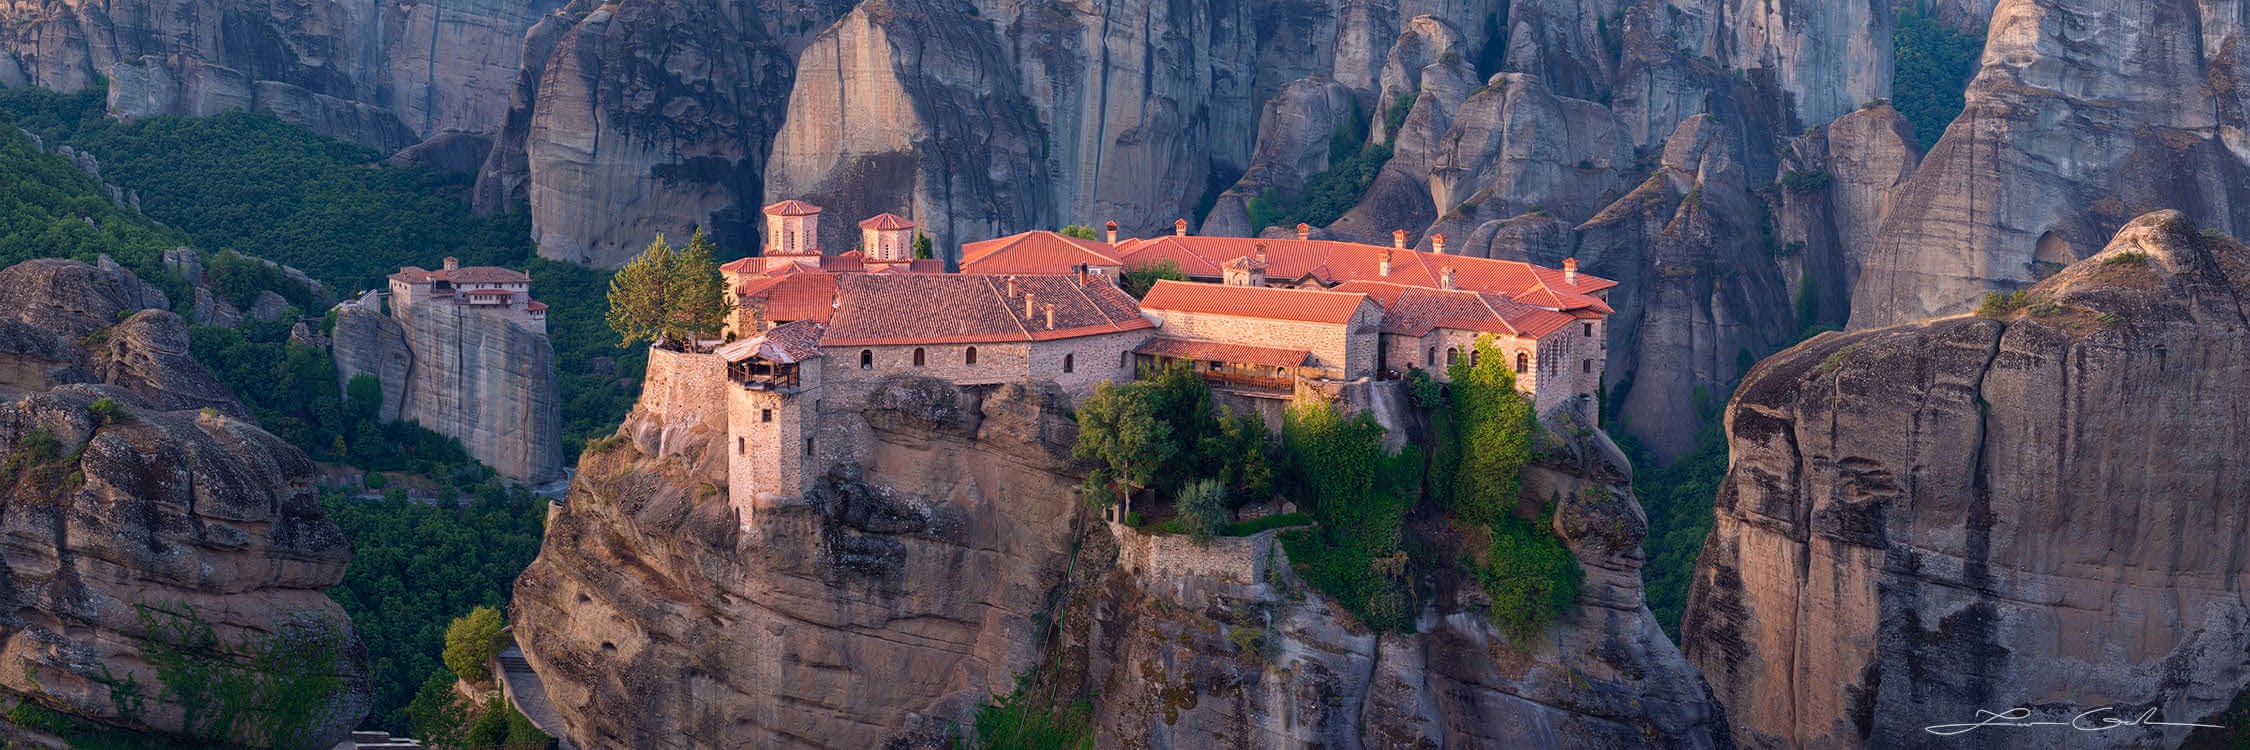 A monastery atop a tall cliff, surrounded by other tall cliffs, Meteora, Greece